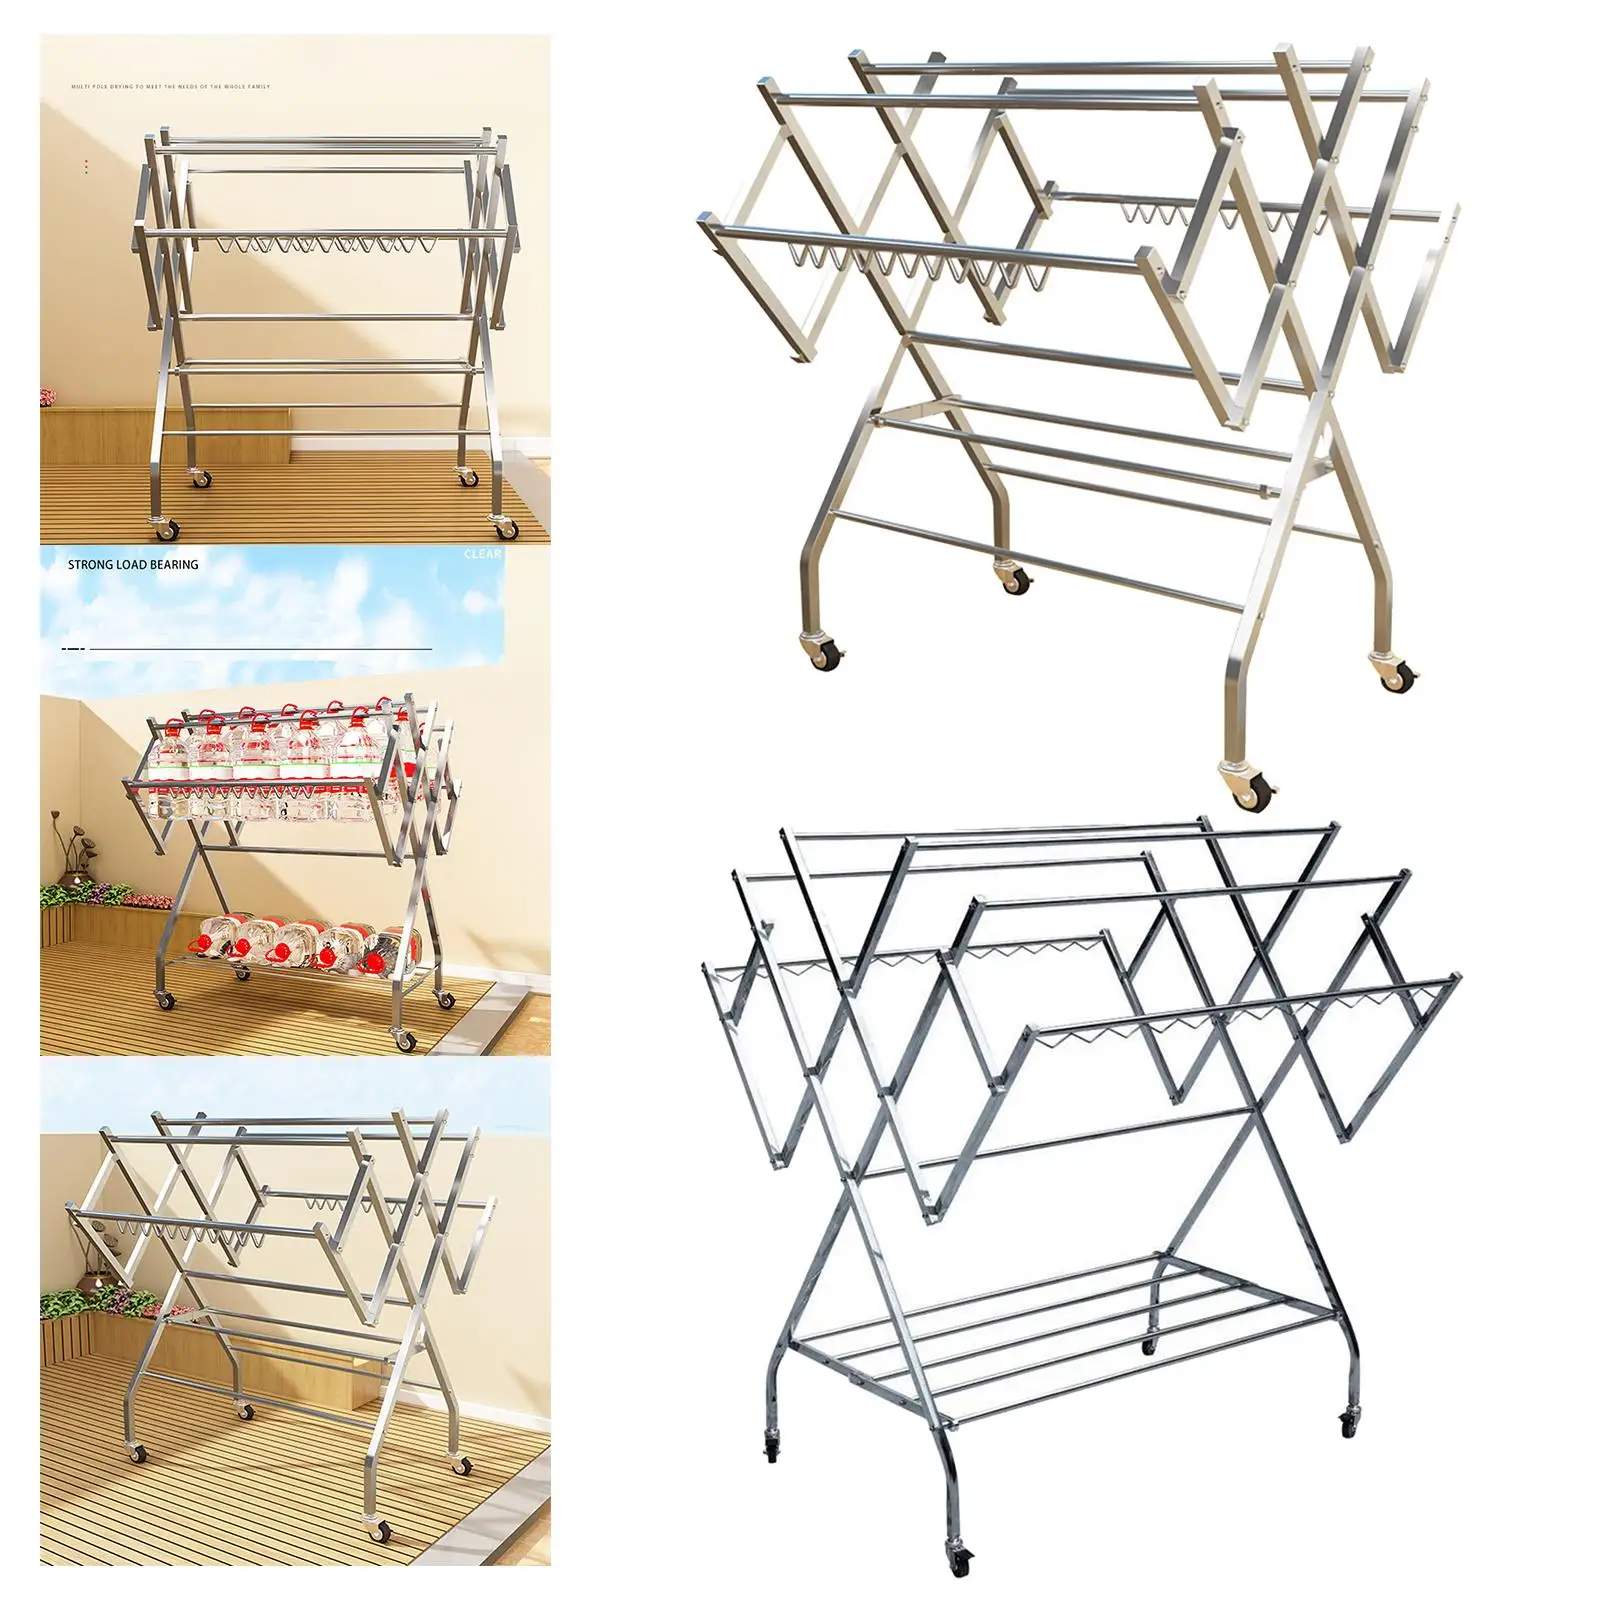 Folding Clothes Drying Rack Multifunctional Laundry Rack Space Saving Easy Storage Floor Drying Rack for Quilts Shoes Bed Sheet